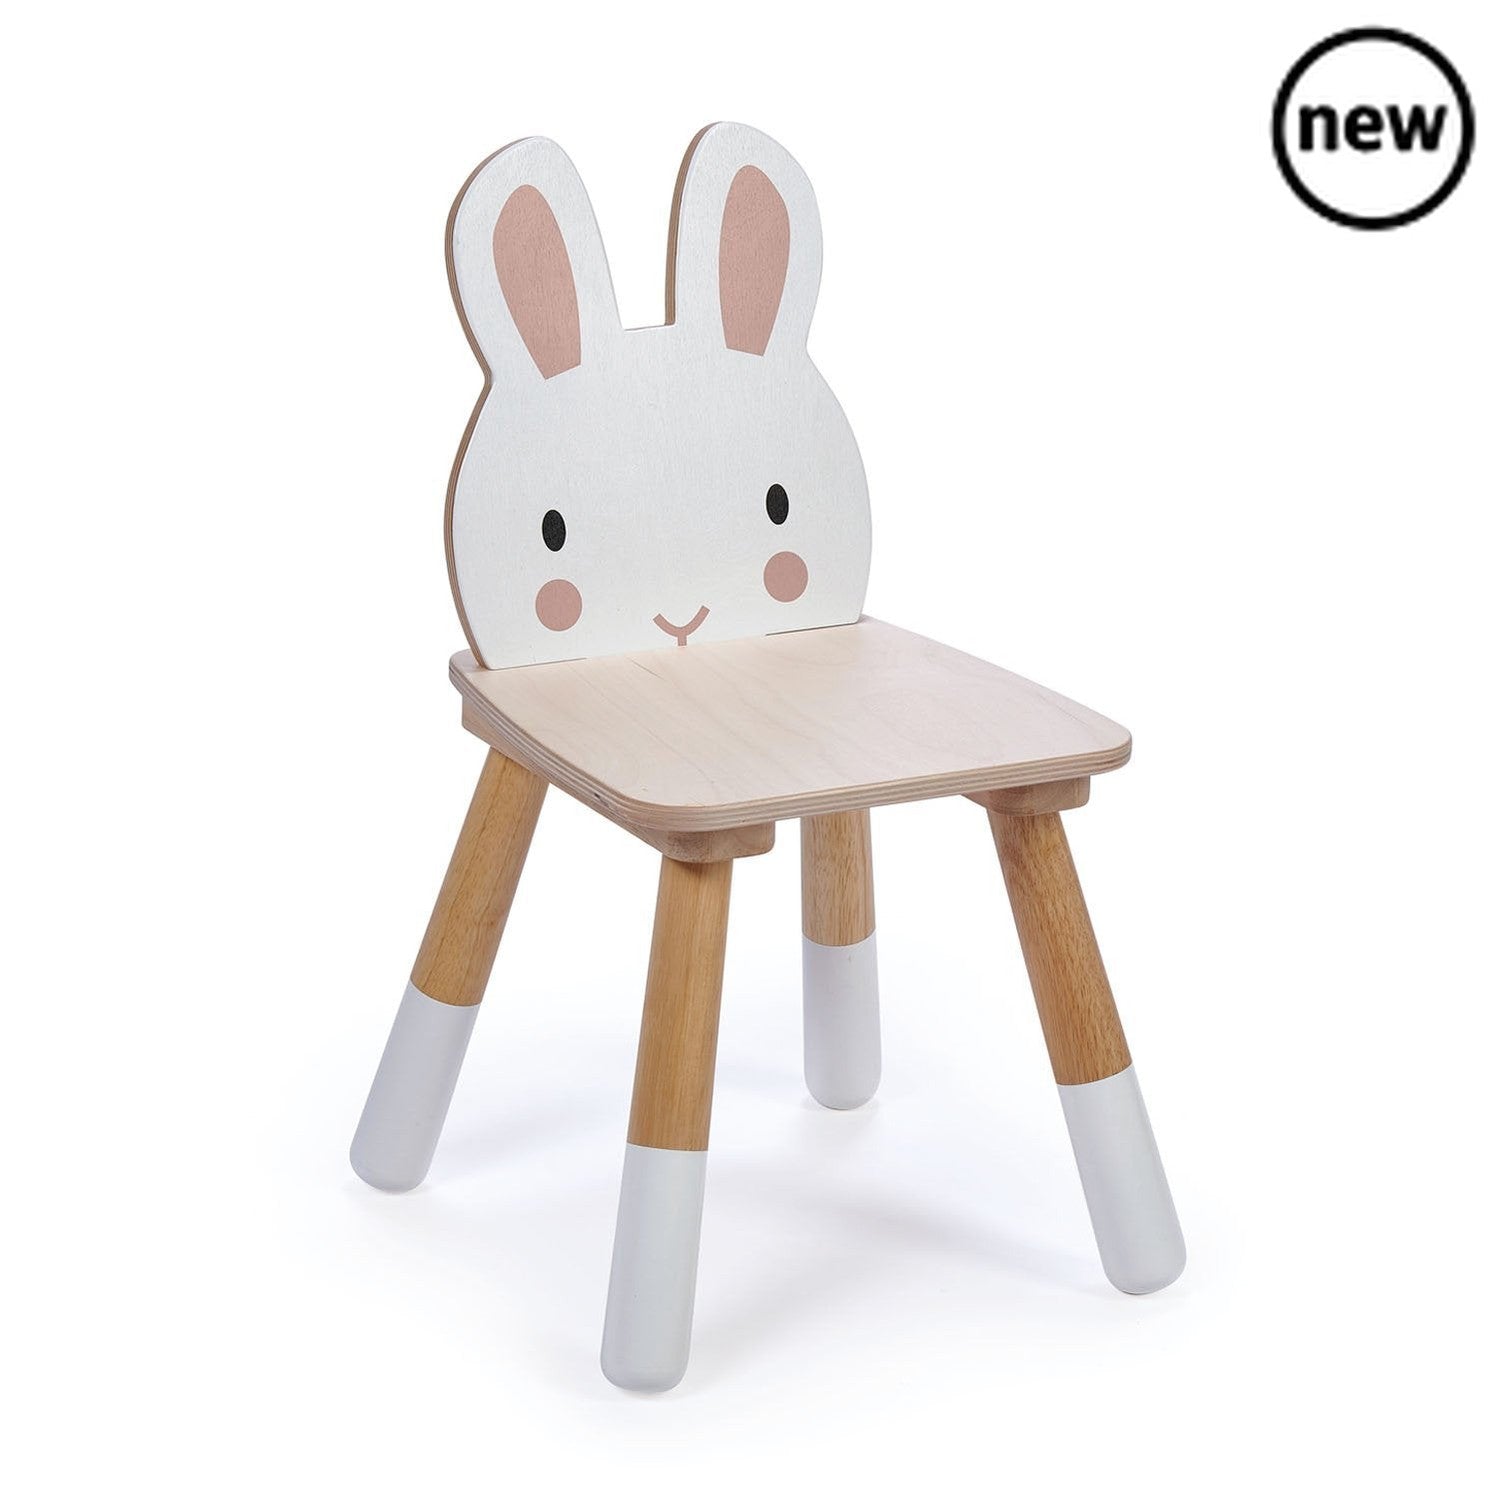 Tenderleaf Toys Wooden Forest Rabbit Chair, Hop little Bunnies hop hop hop.... This fun high quality plywood Rabbit chair by Tender Leaf Toys works perfectly with the Tender Leaf Toys Forest table, or your own small table. Children will love sitting in this boing boing Rabbit chair! Self Assembly 32 x 30 x 48cm, Tenderleaf Toys Wooden Forest Rabbit Chair,Wooden Toys,Tenderleaf, 